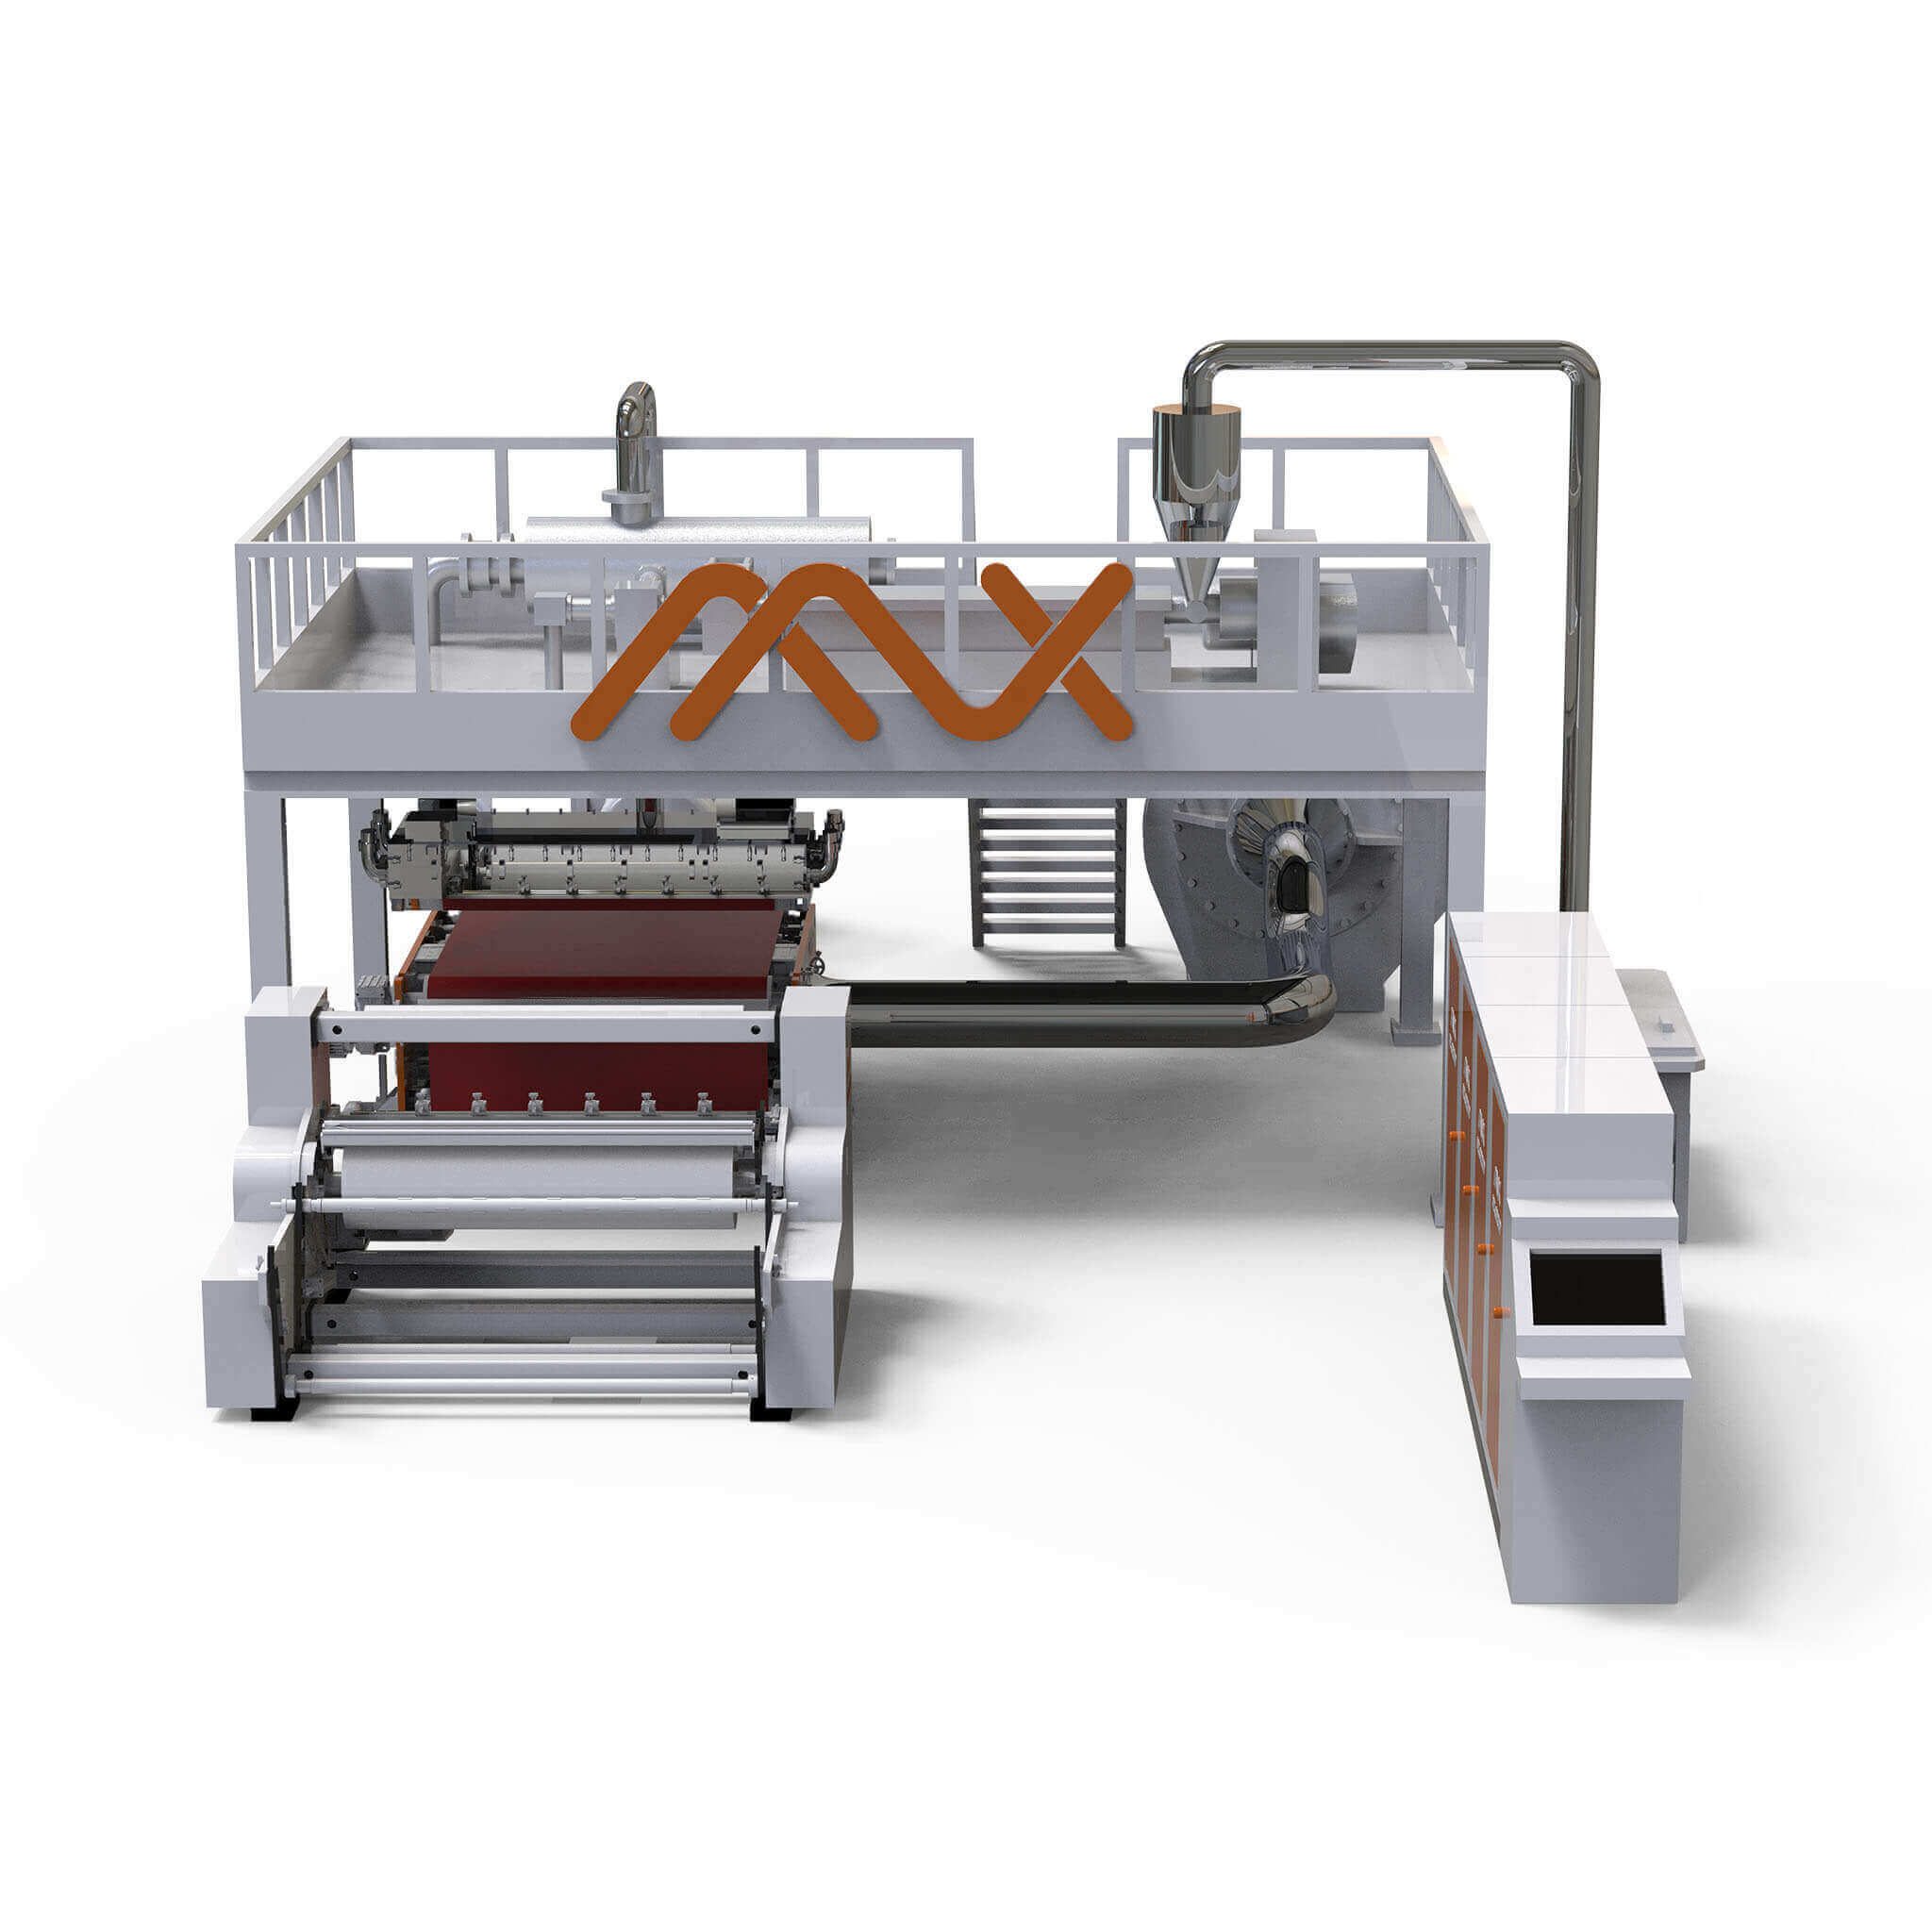 meltblown non woven fabric making machine can make meltblown non woven fabric for masks, protective clothes.